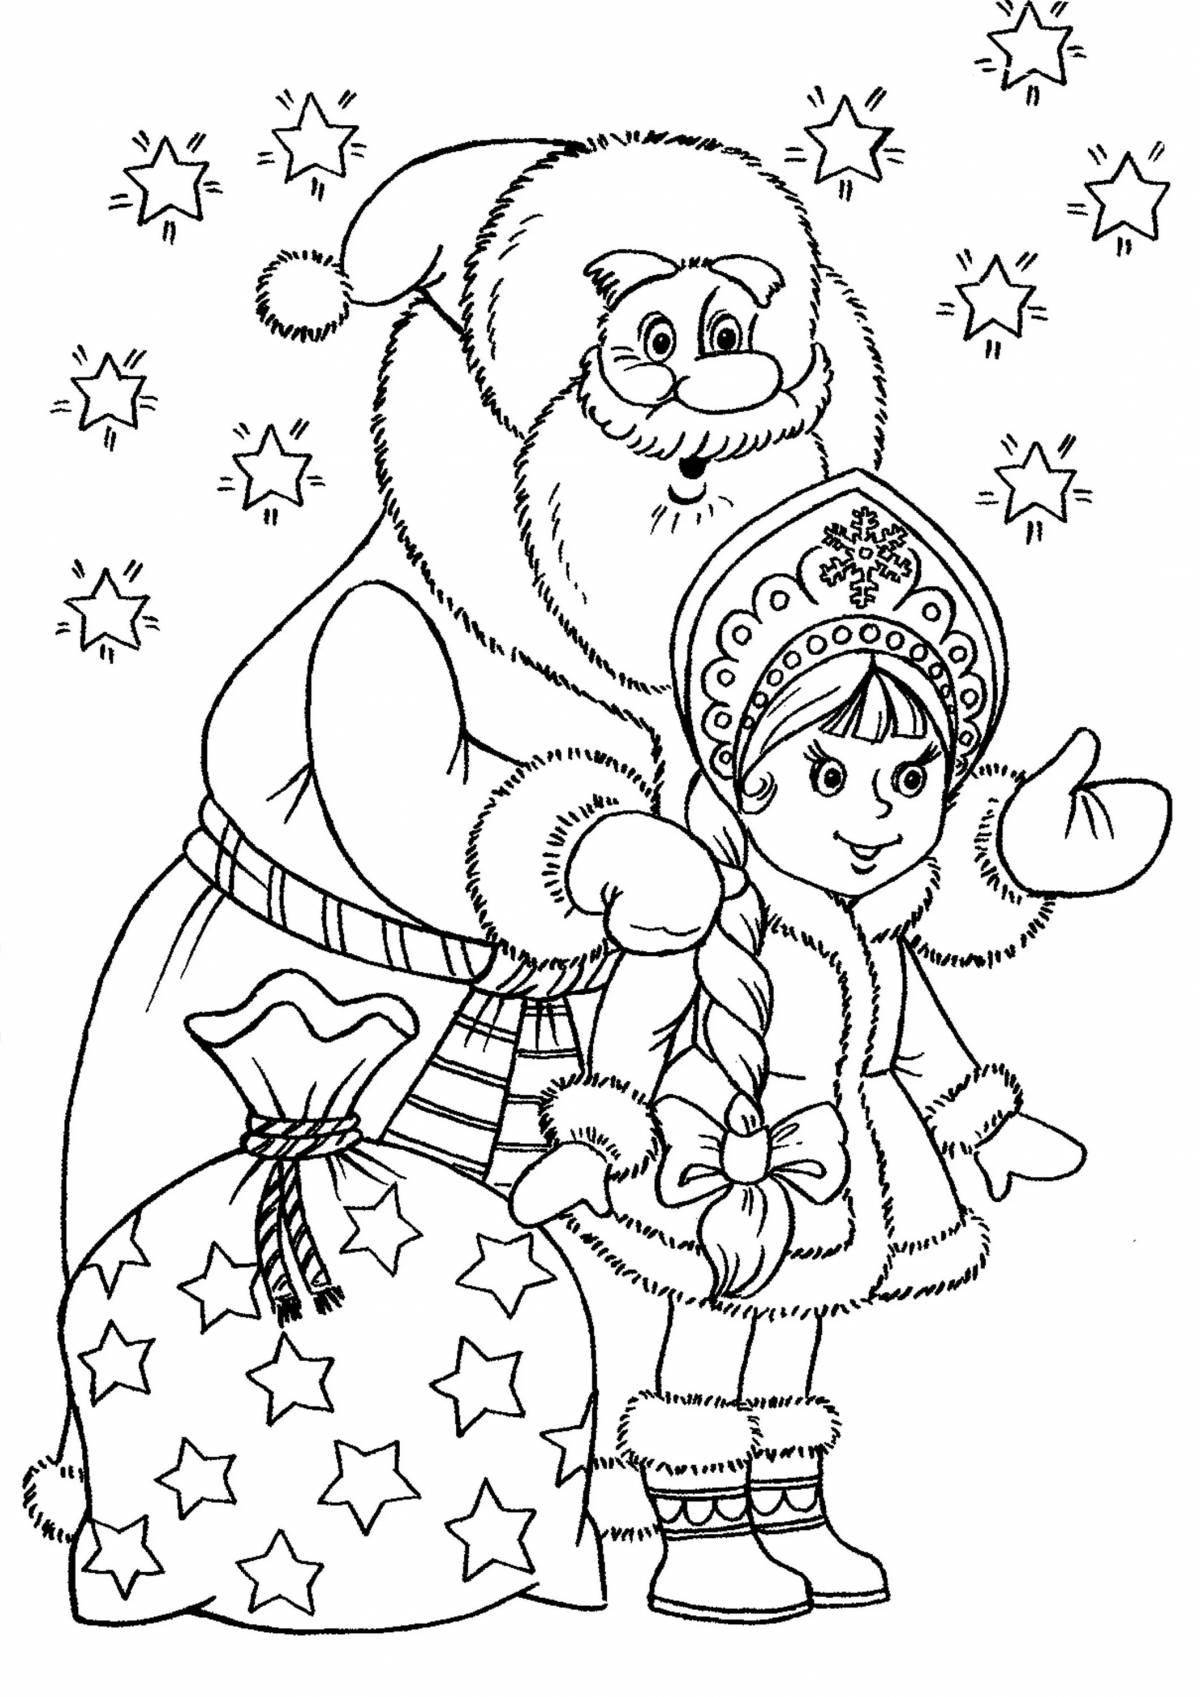 Exquisite Christmas coloring pictures